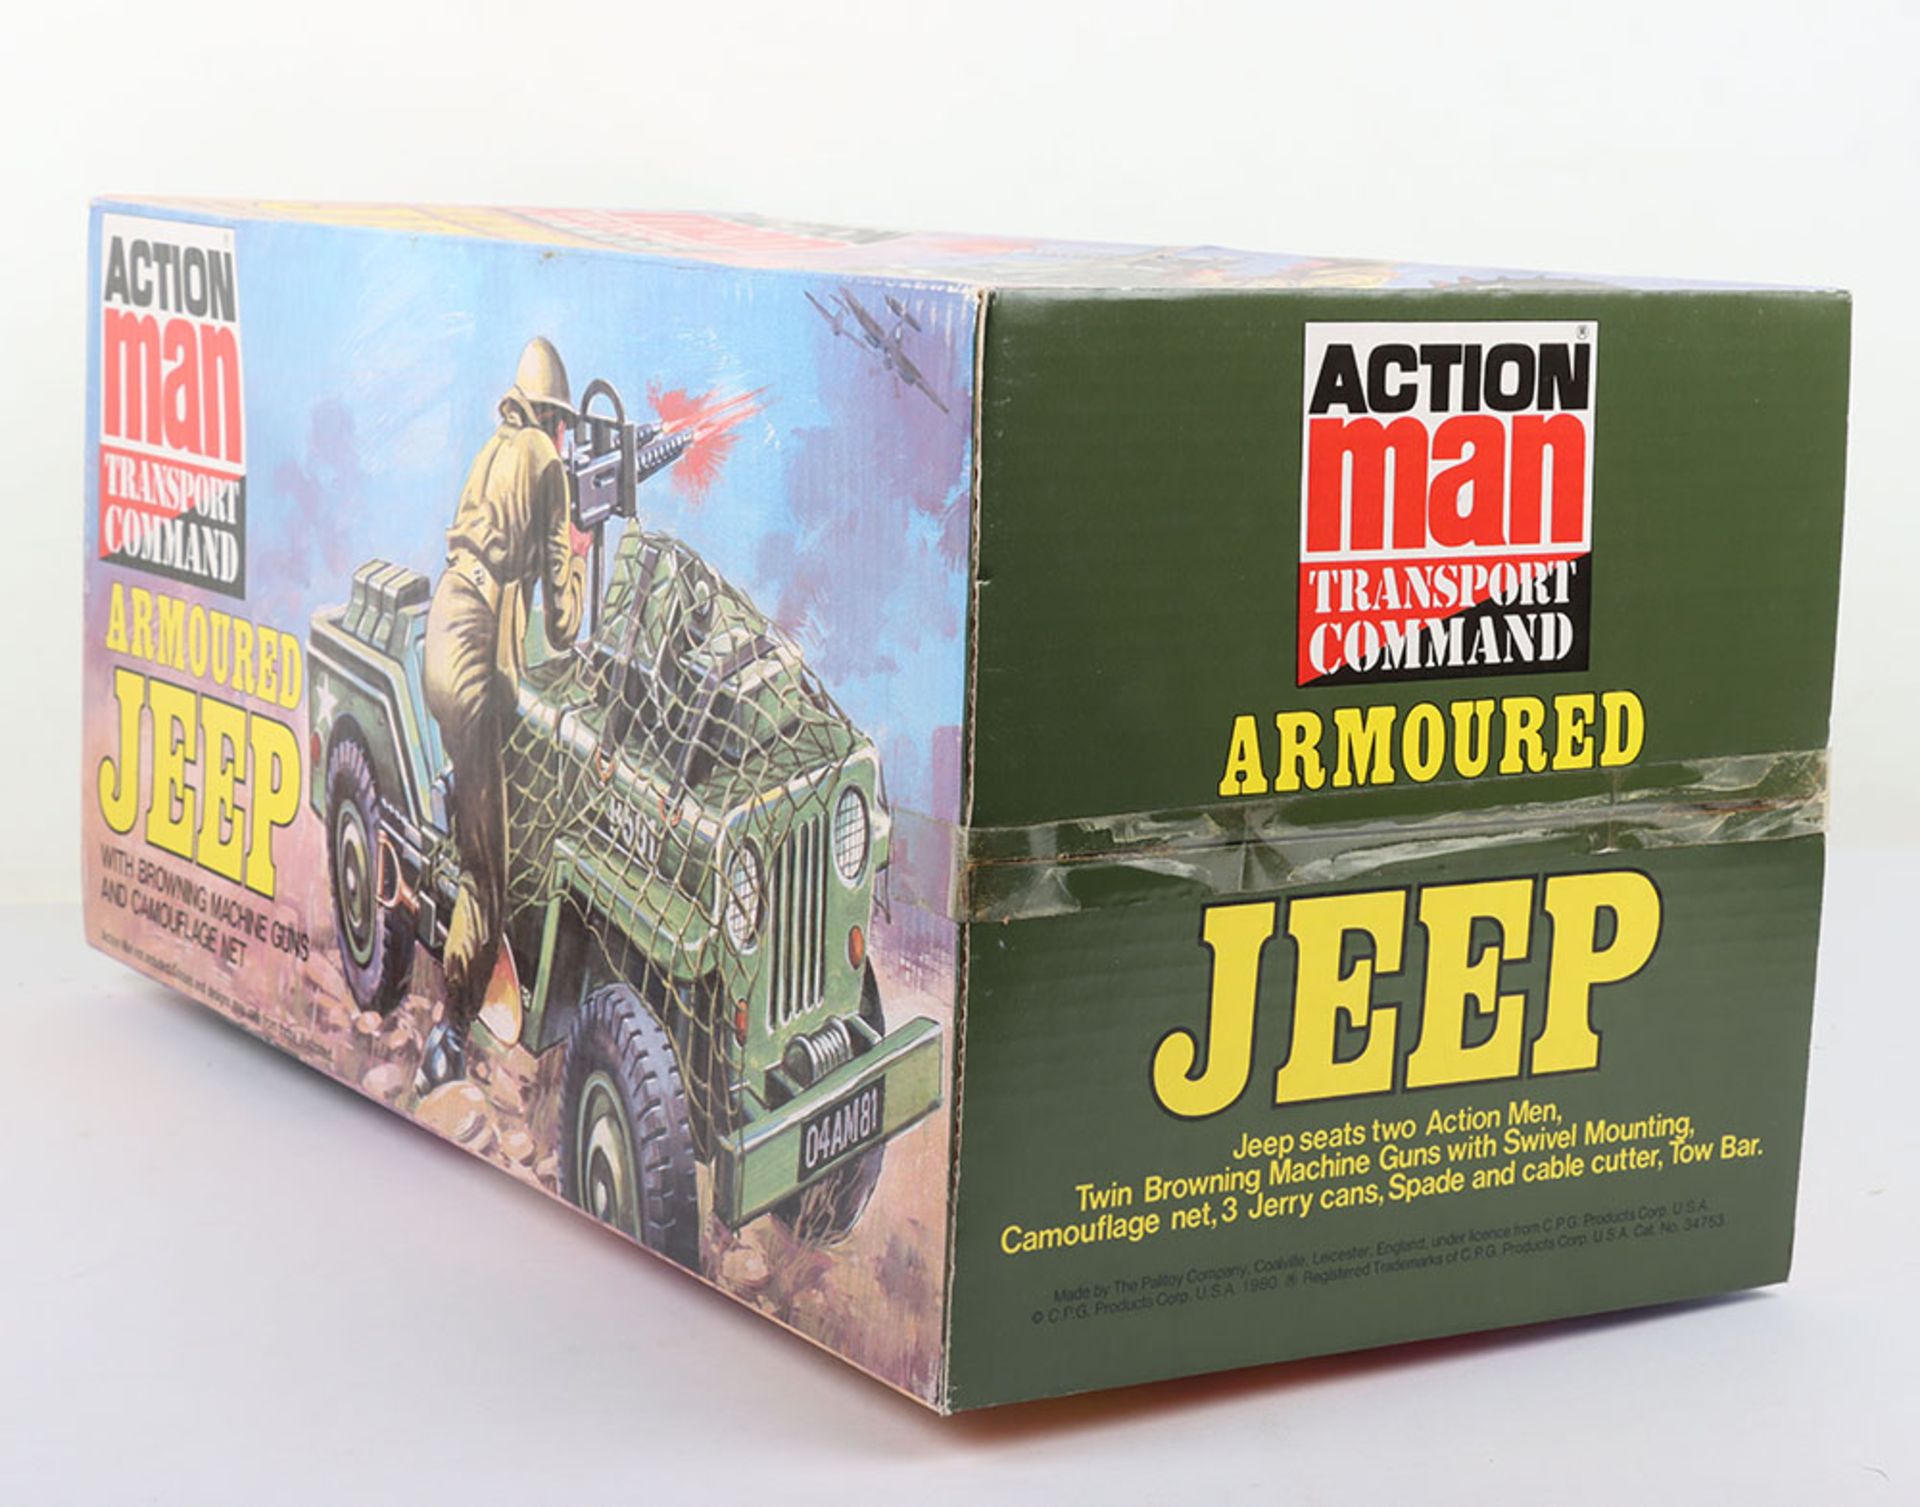 Palitoy Action Man Transport Command Armoured Jeep - Image 4 of 5